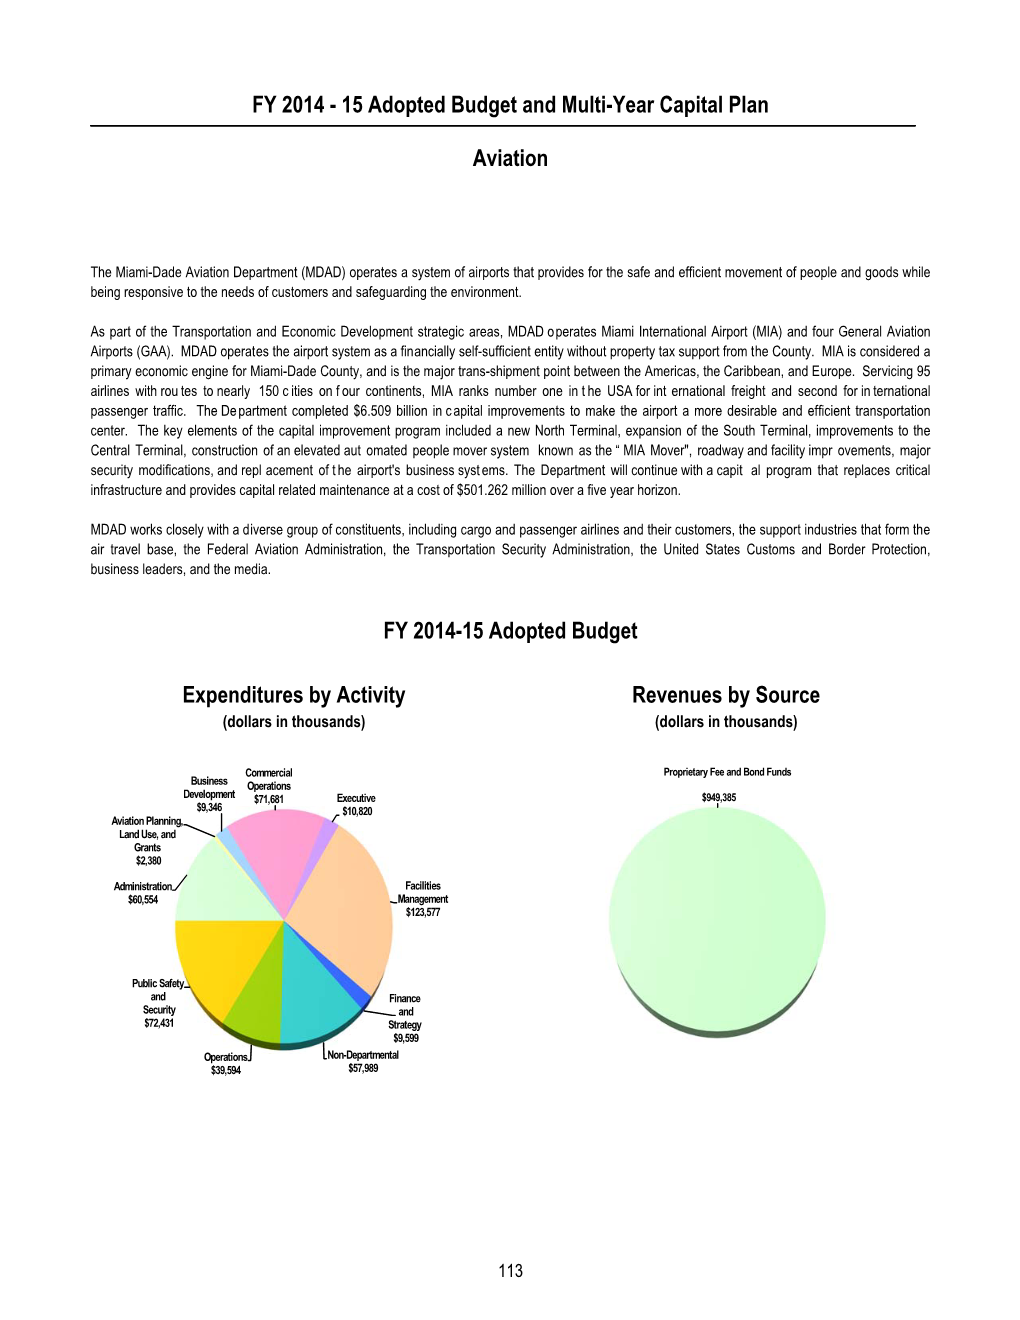 15 Adopted Budget and Multi-Year Capital Plan Aviation FY 2014-15